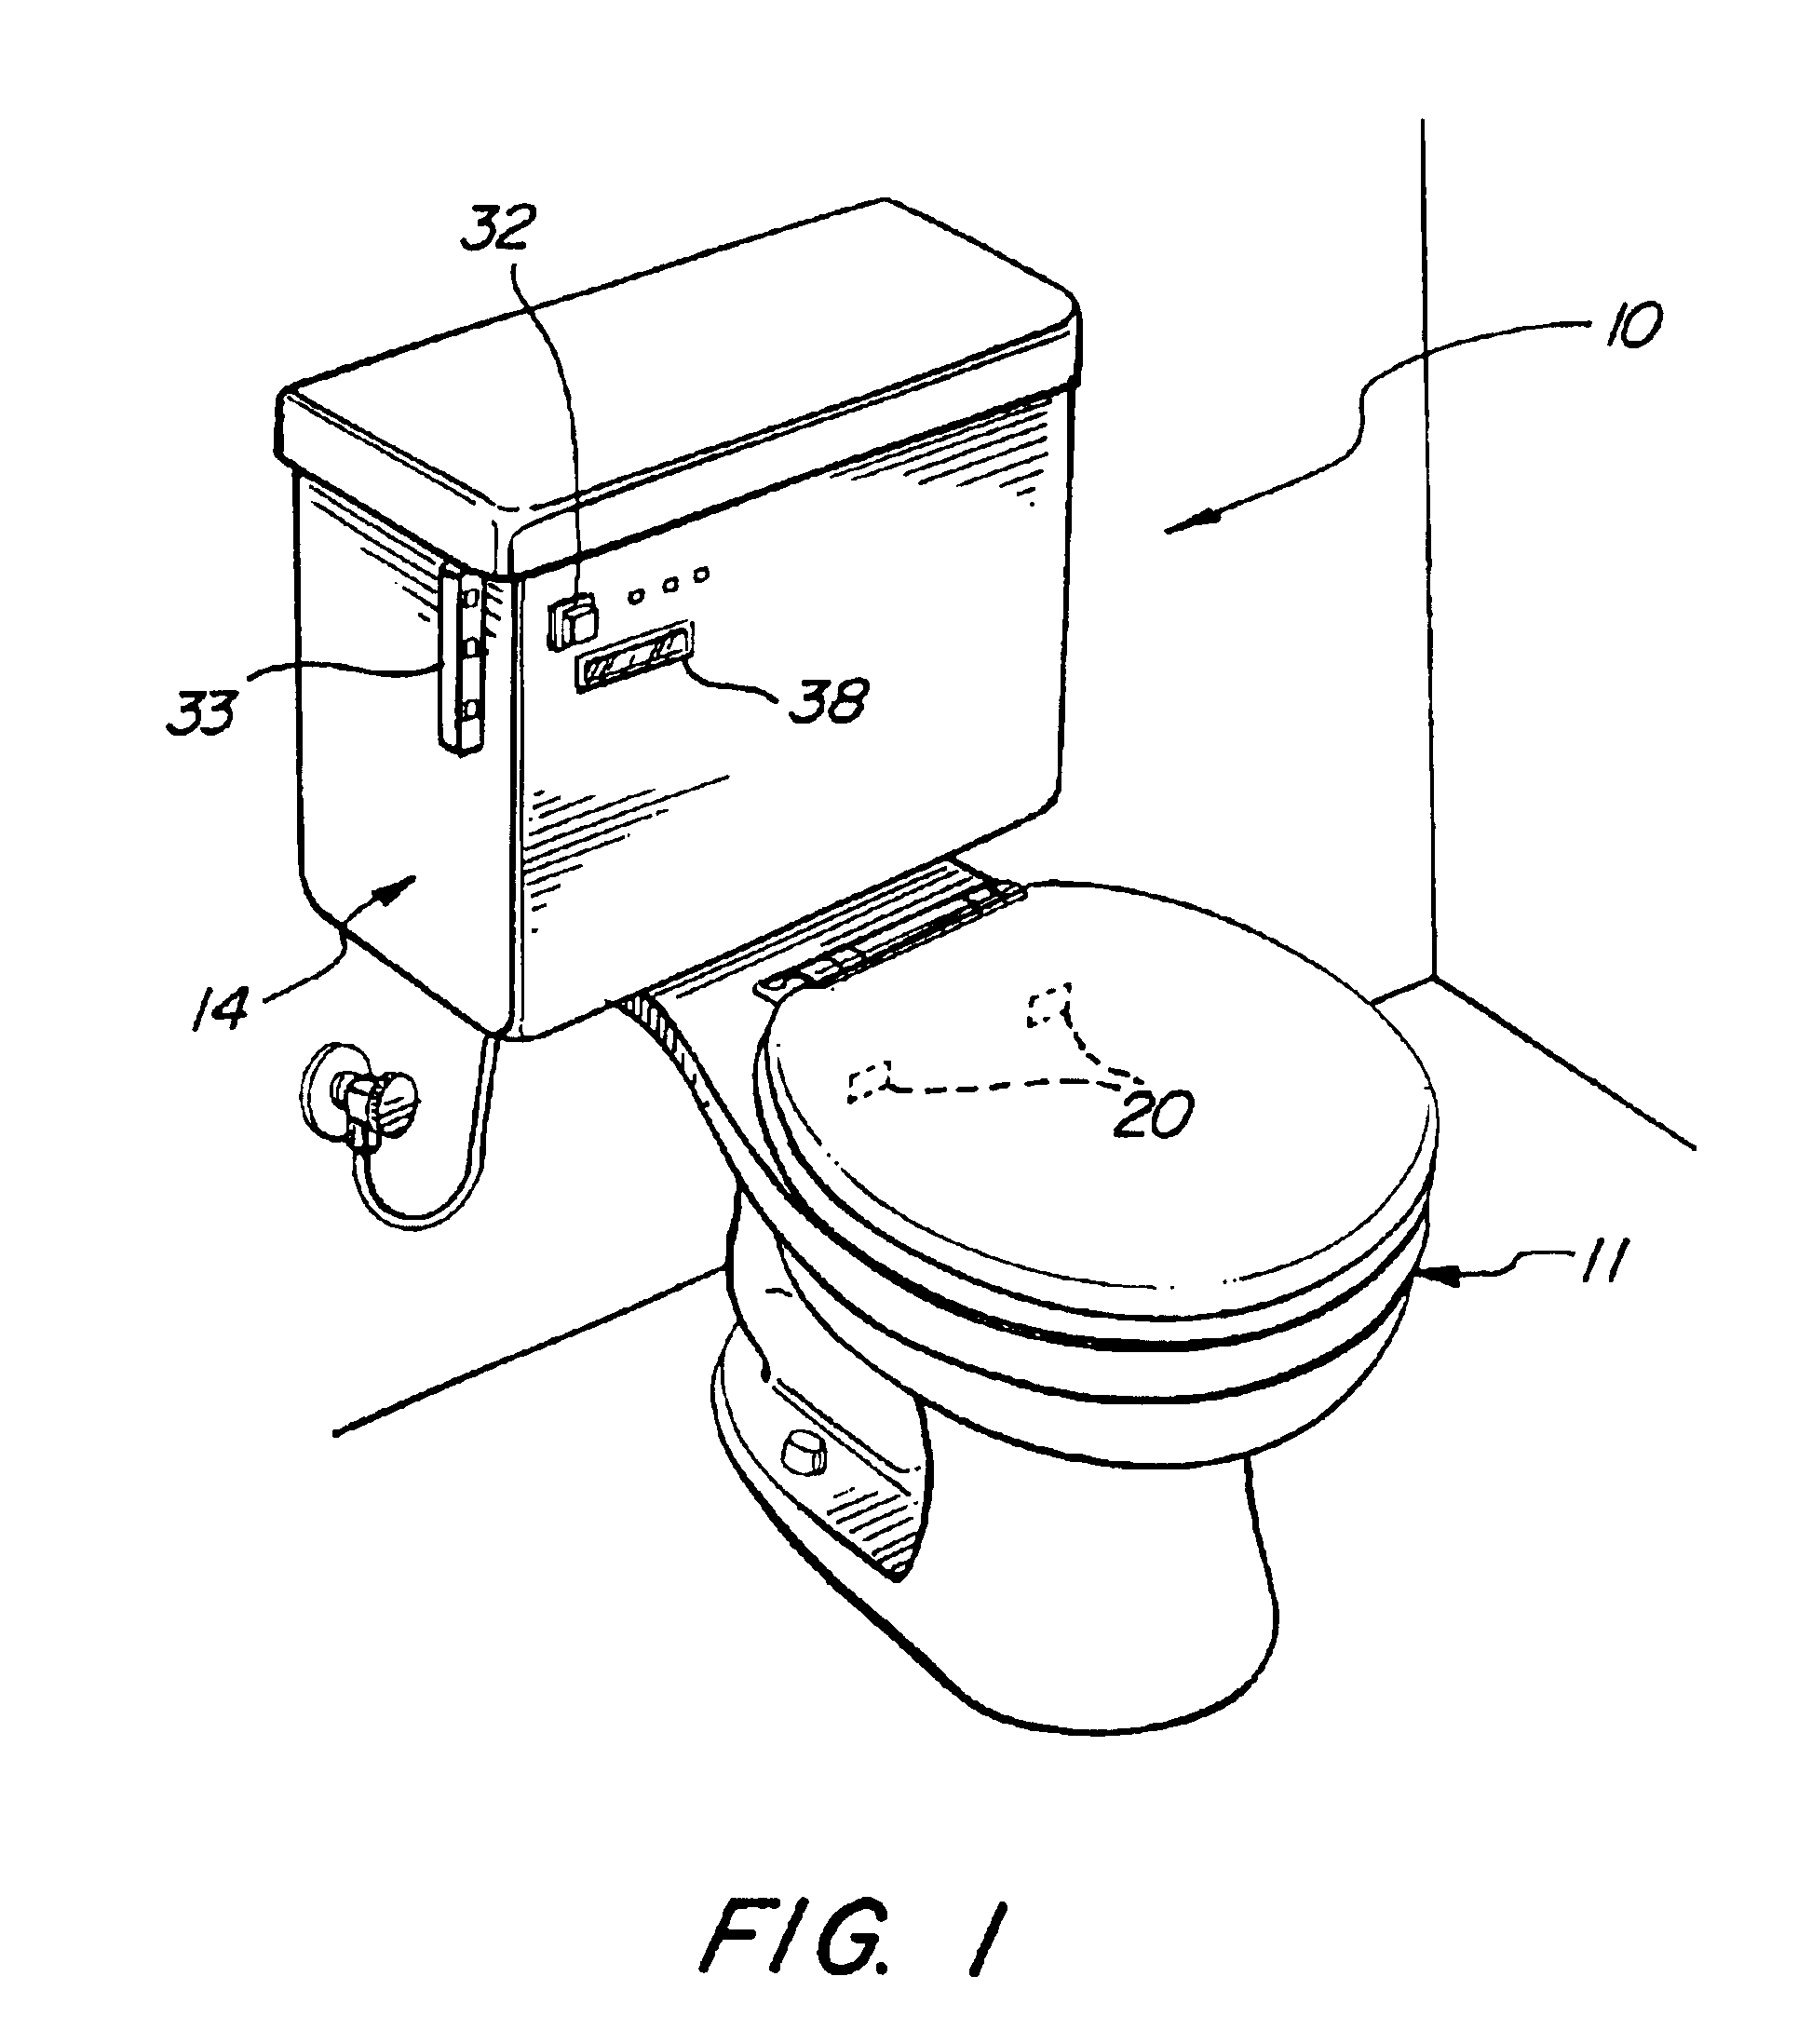 Toilet control system